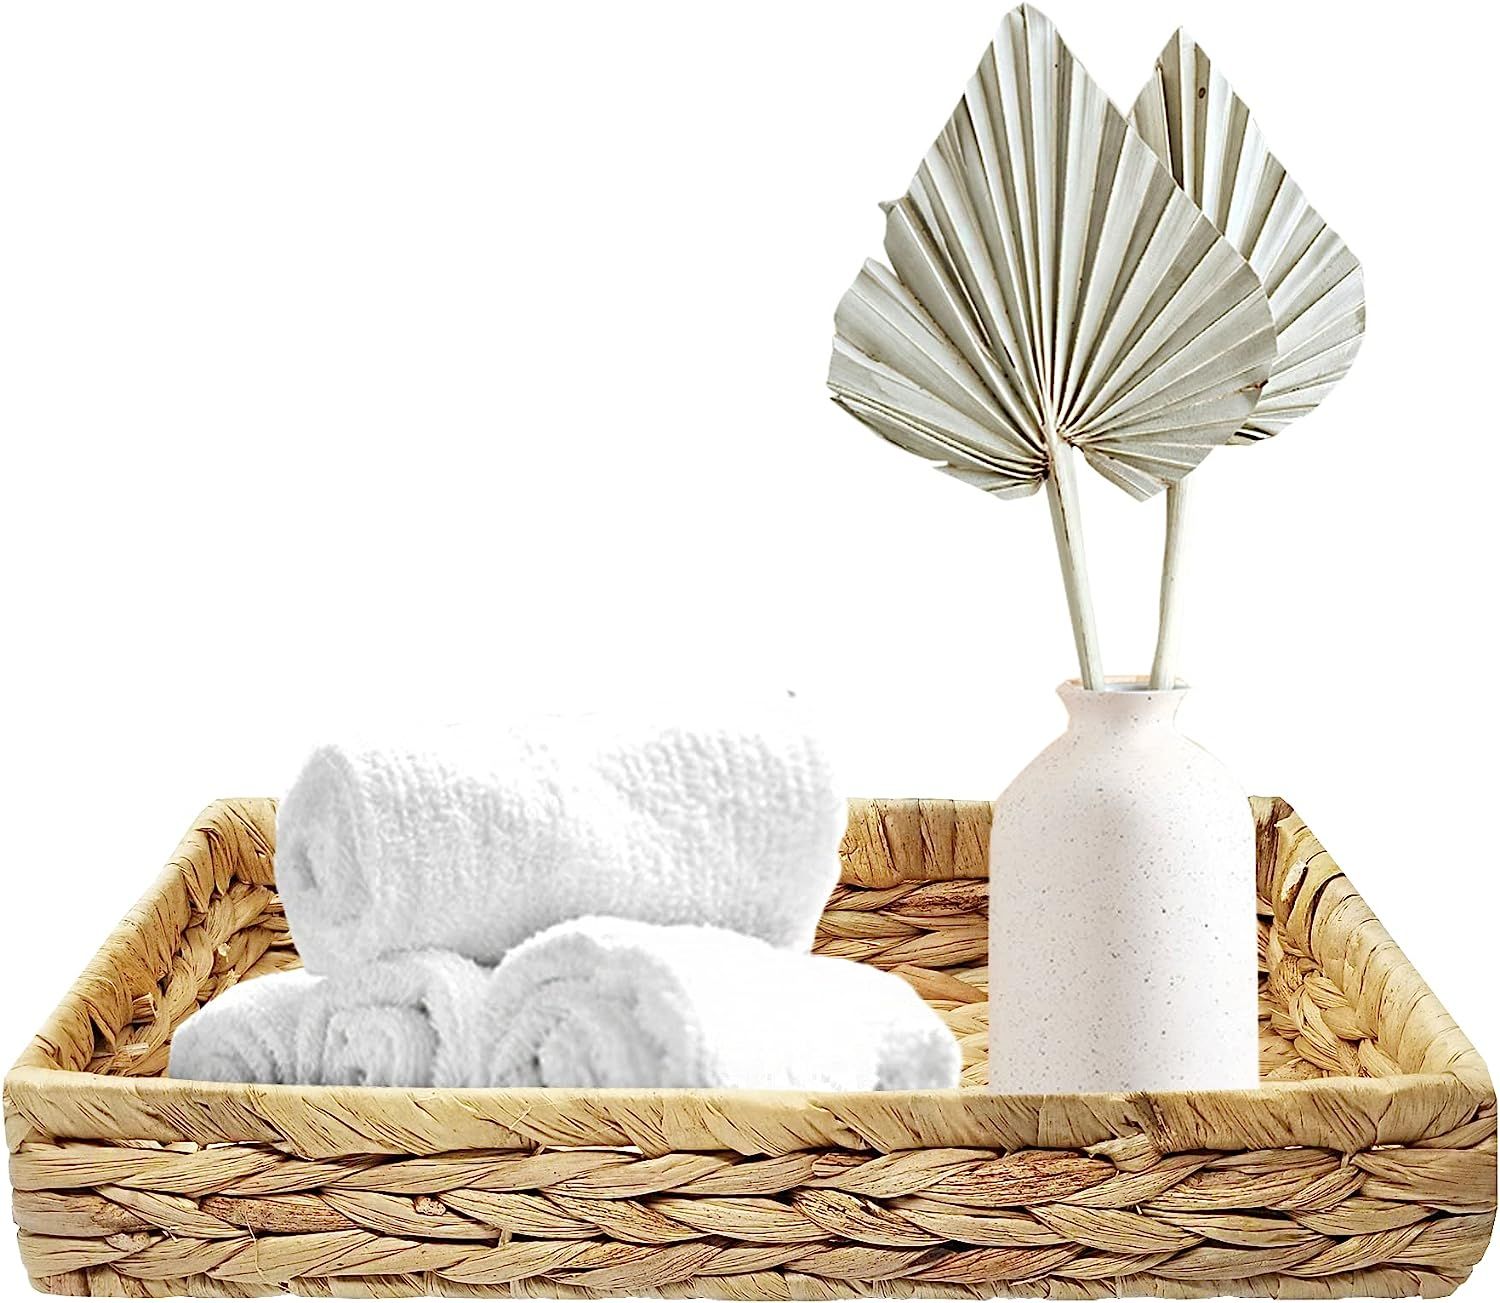 TAGREE Rustic Woven Seagrass Guest Towel Tray Holder for spa, Farmhouse Water Hyacinth Guest Towel N | Amazon (US)